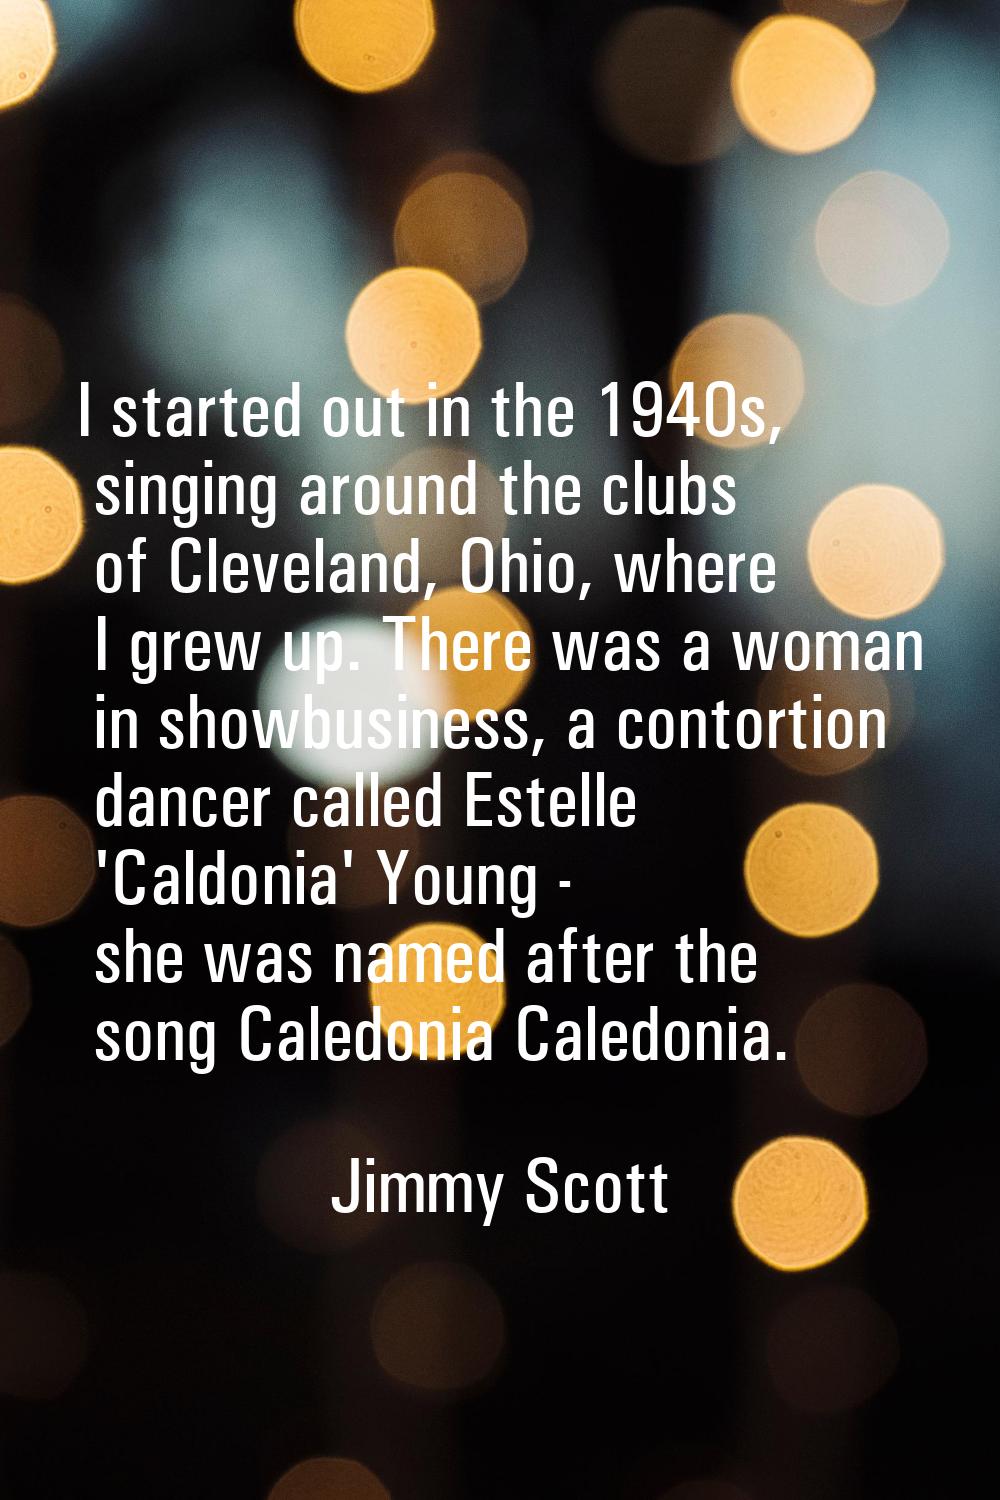 I started out in the 1940s, singing around the clubs of Cleveland, Ohio, where I grew up. There was